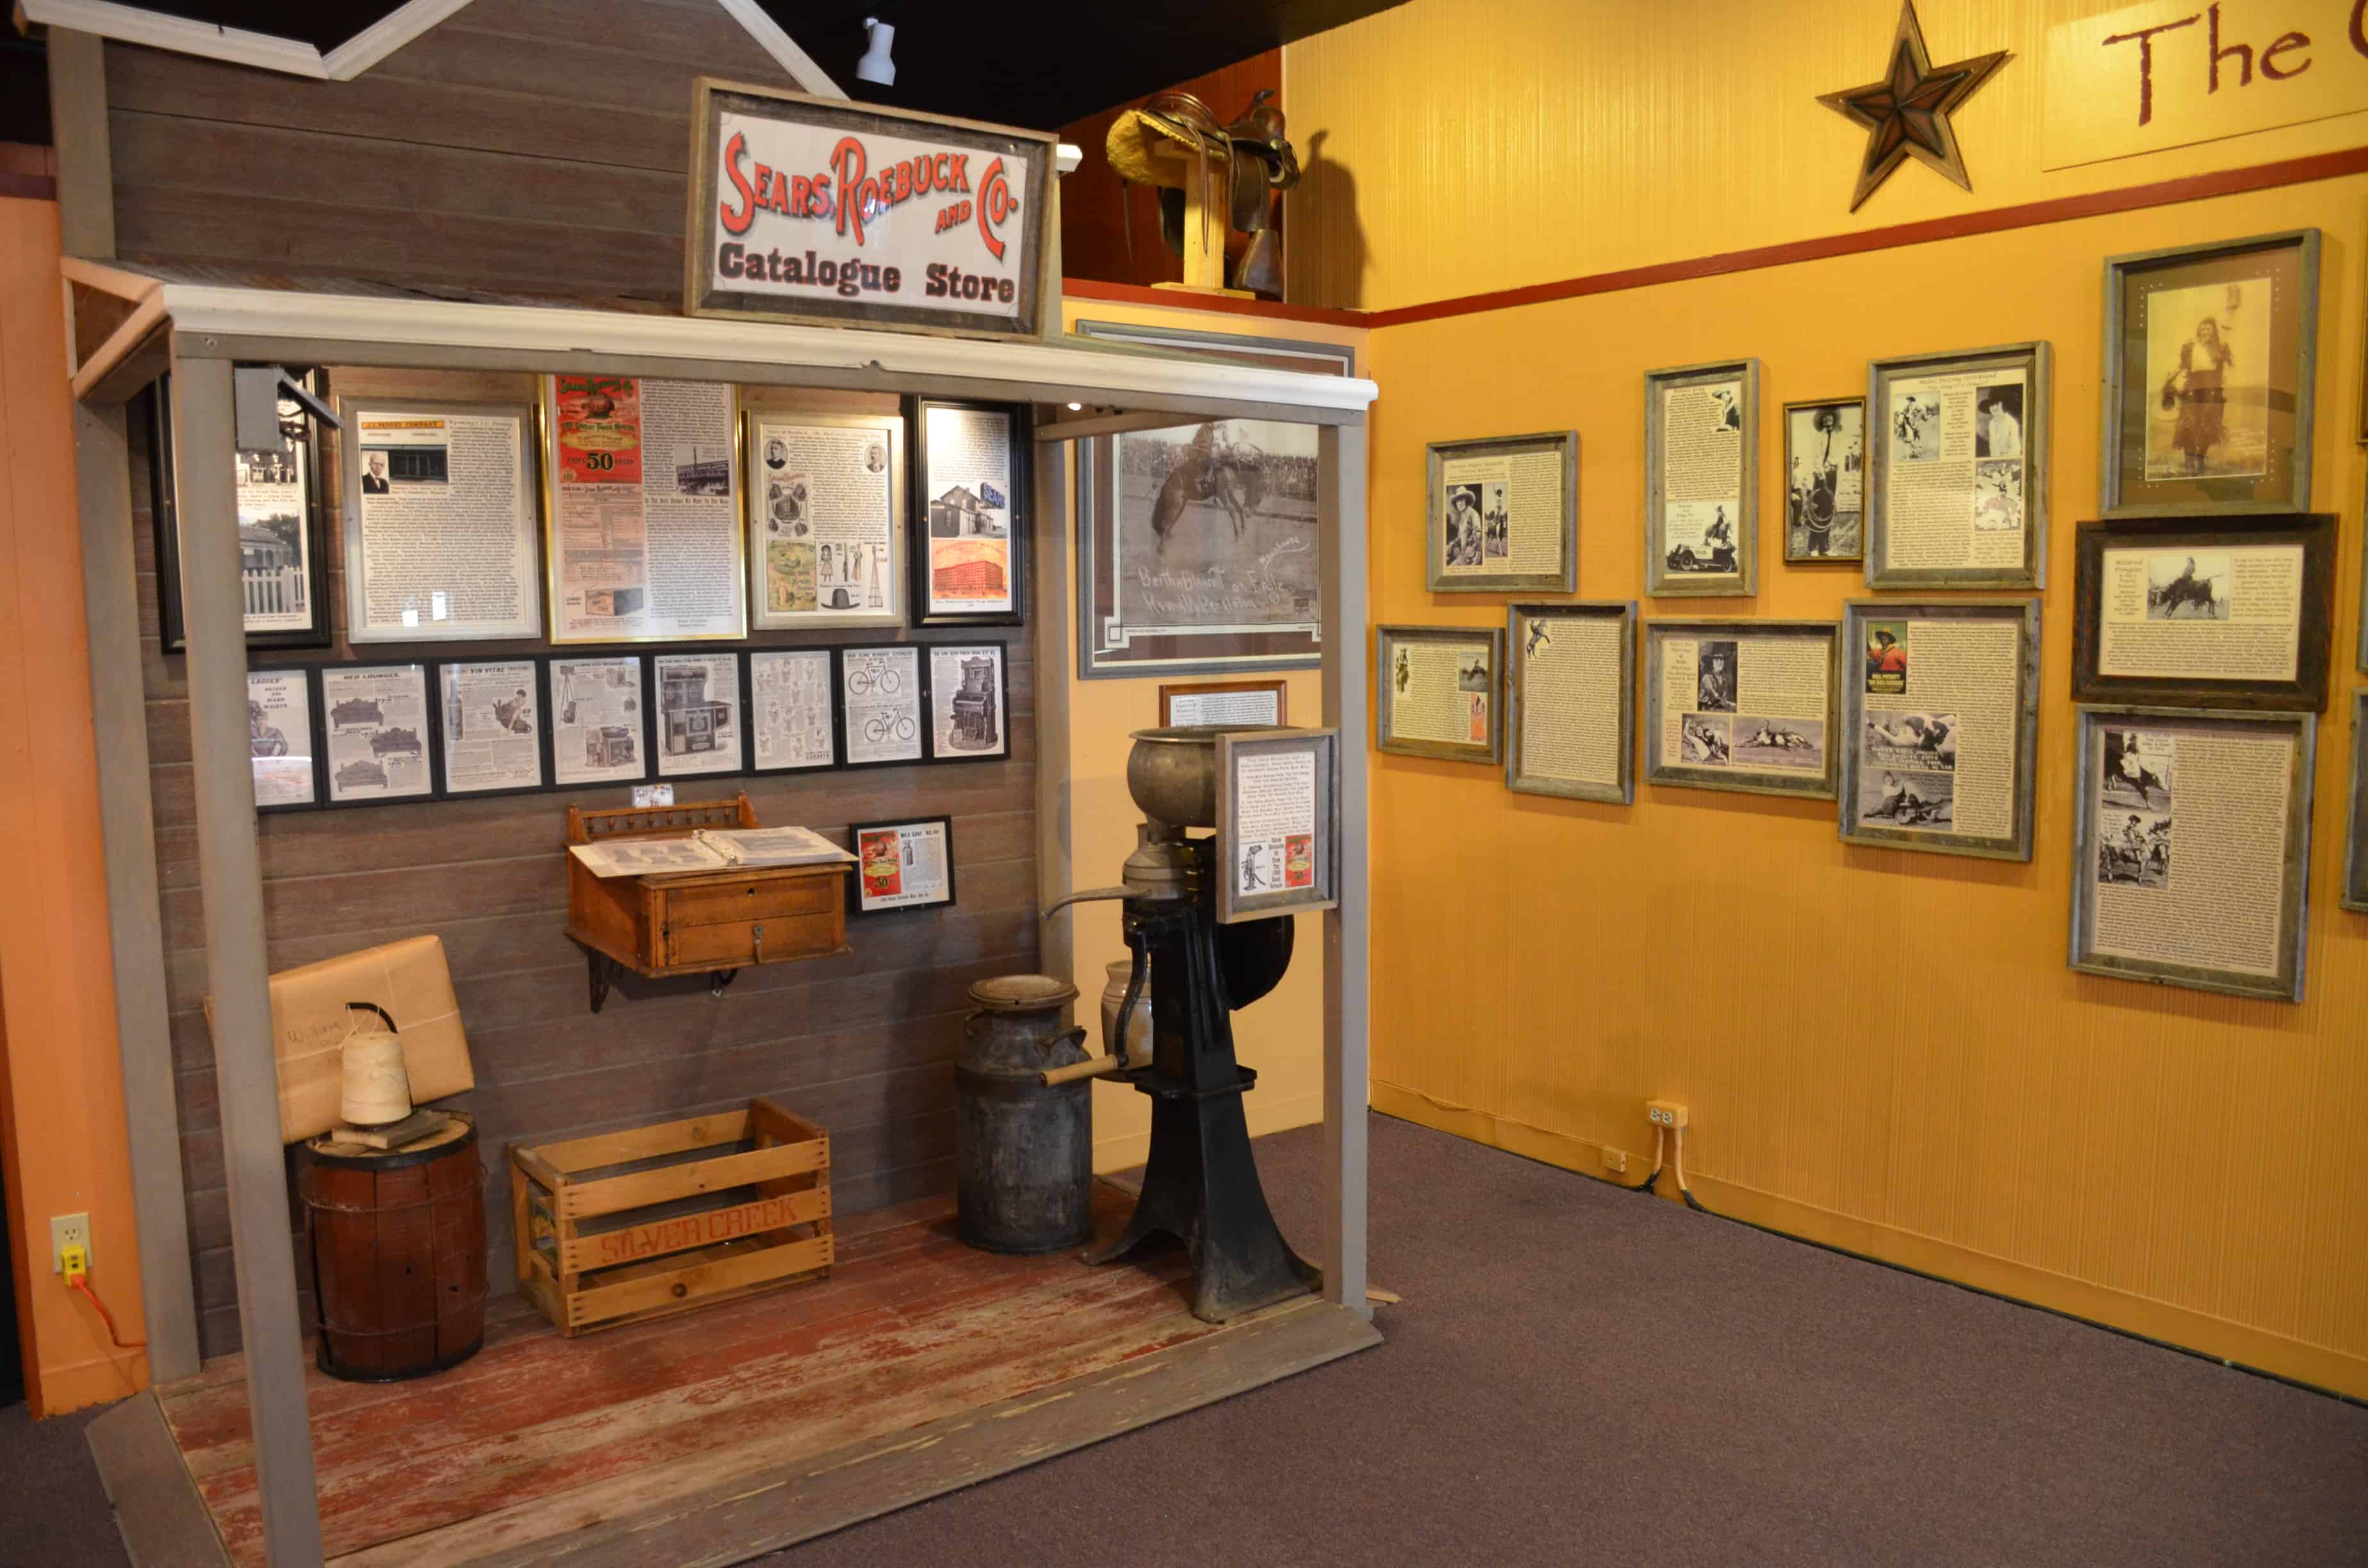 Sears catalogue display at the Cowgirls of the West Museum in Cheyenne, Wyoming